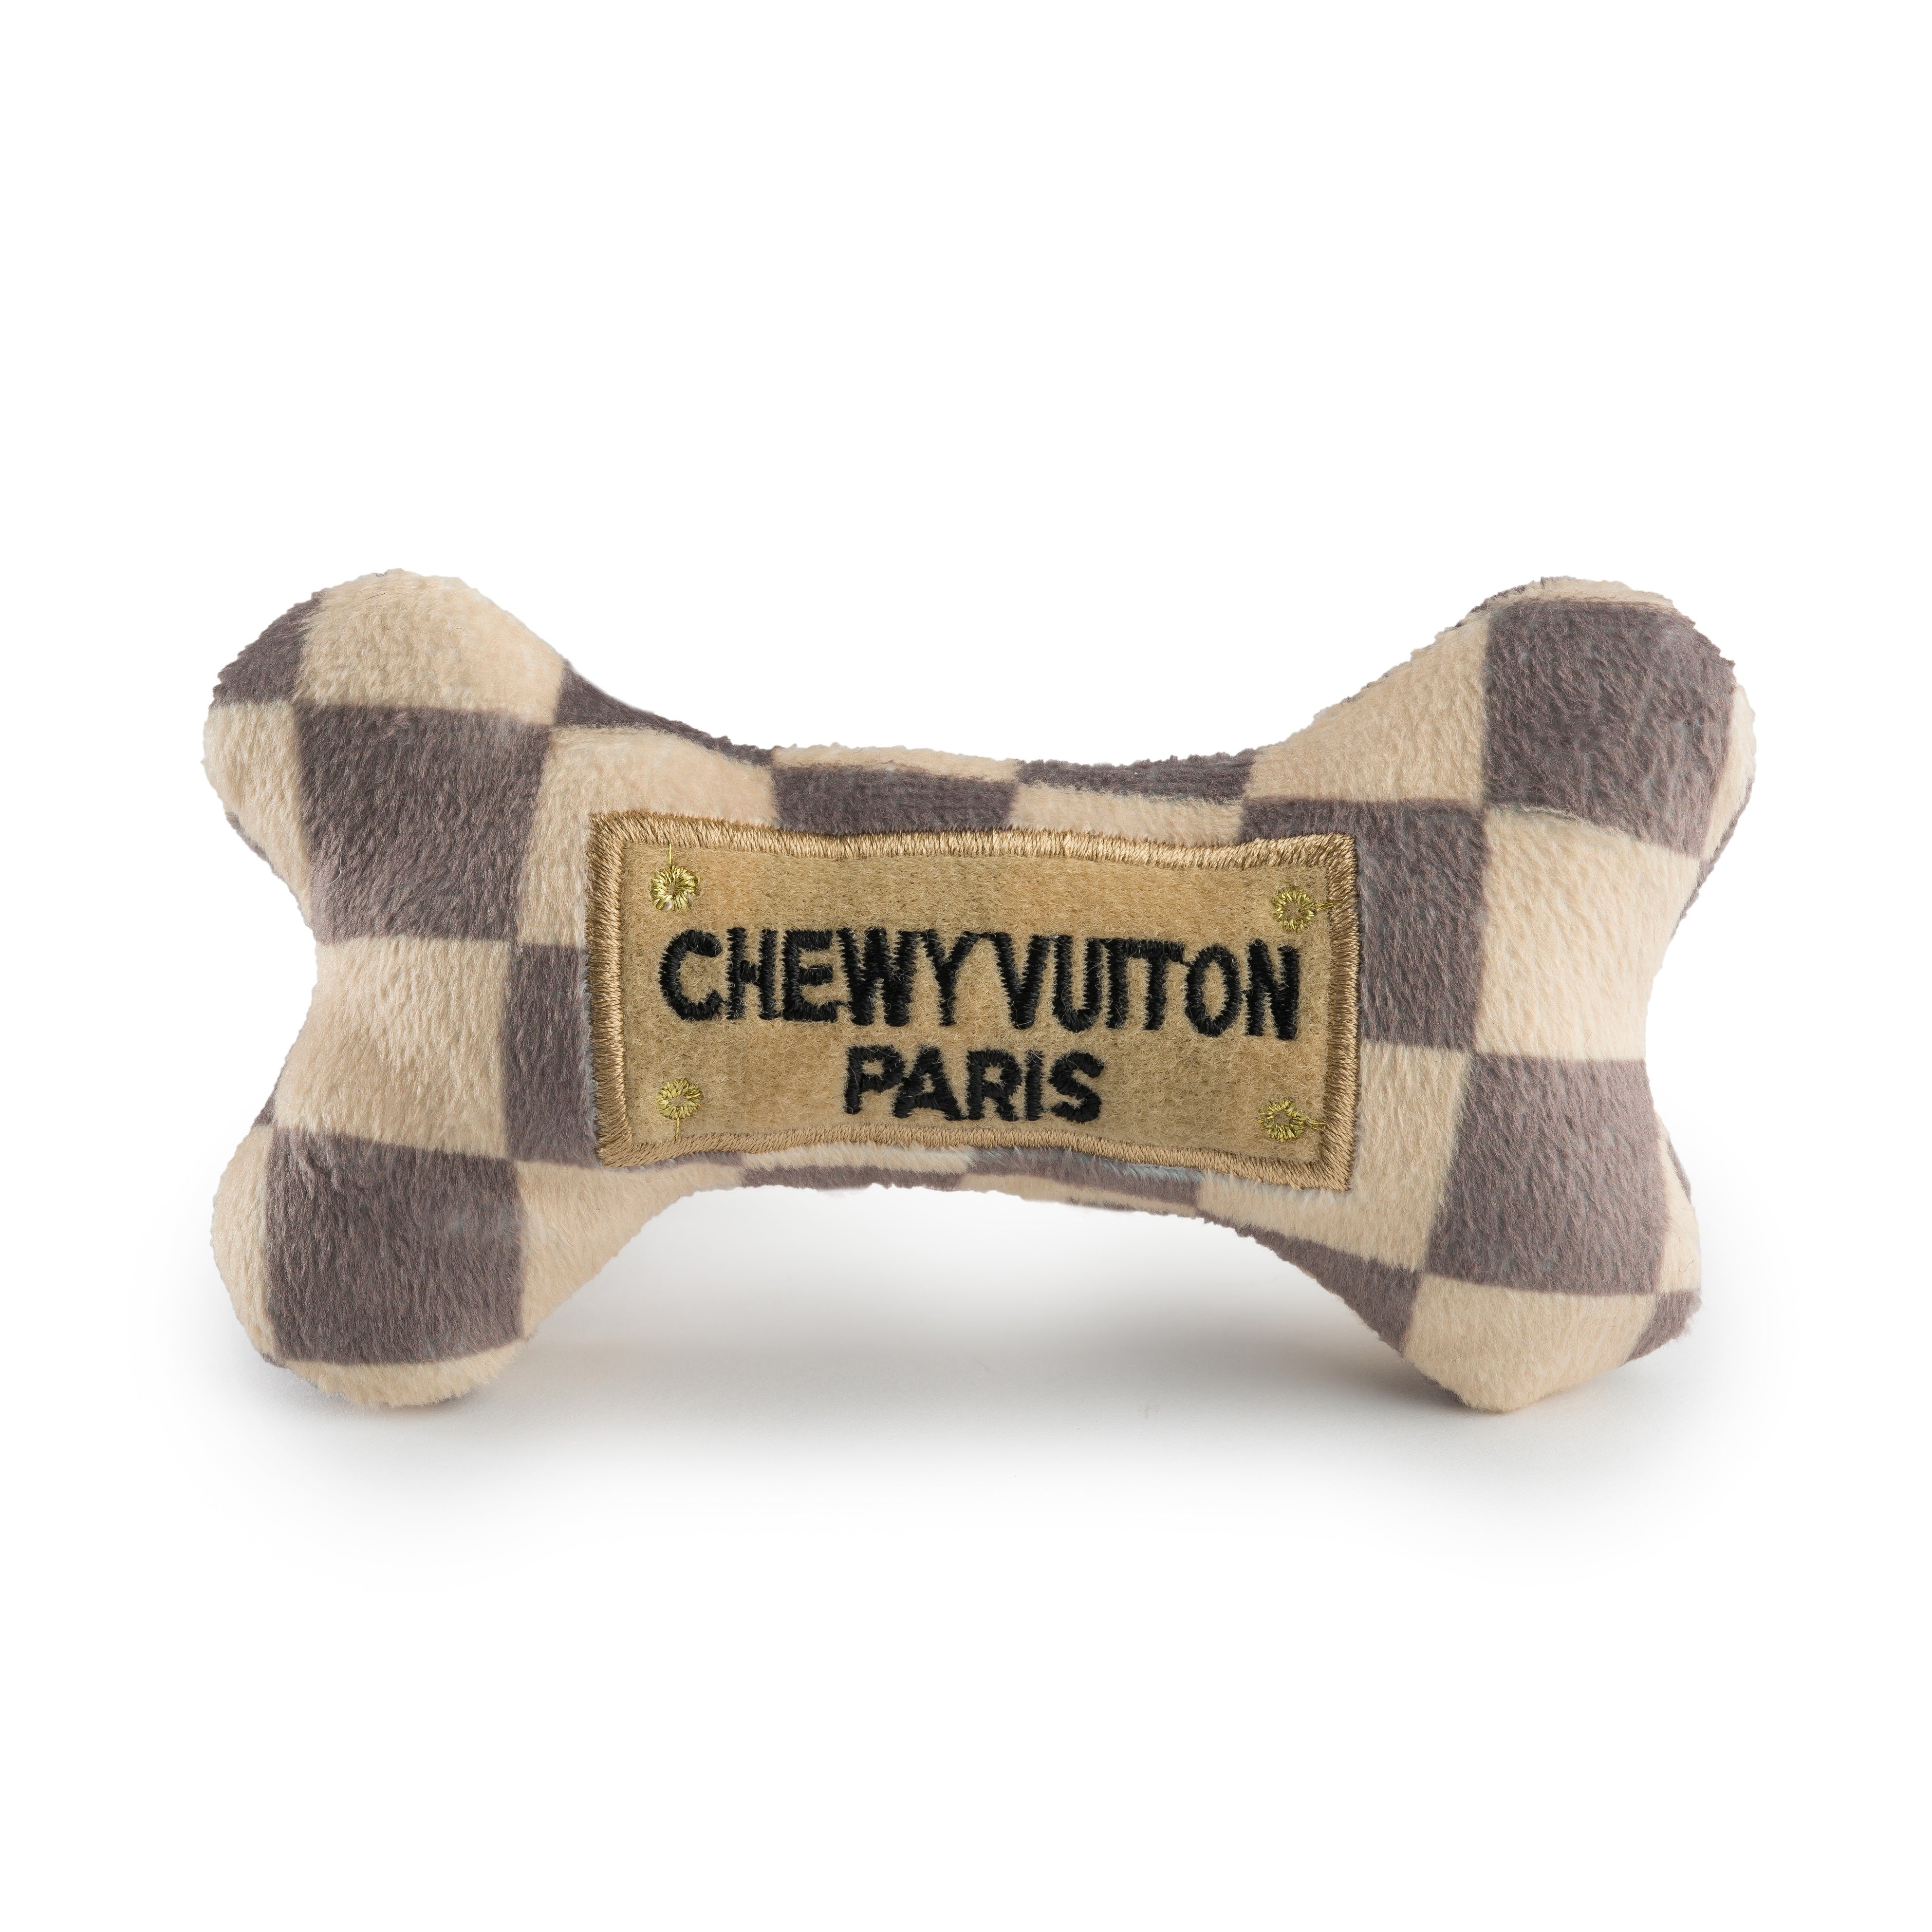 Small Chewy Vuitton Dog Bowl